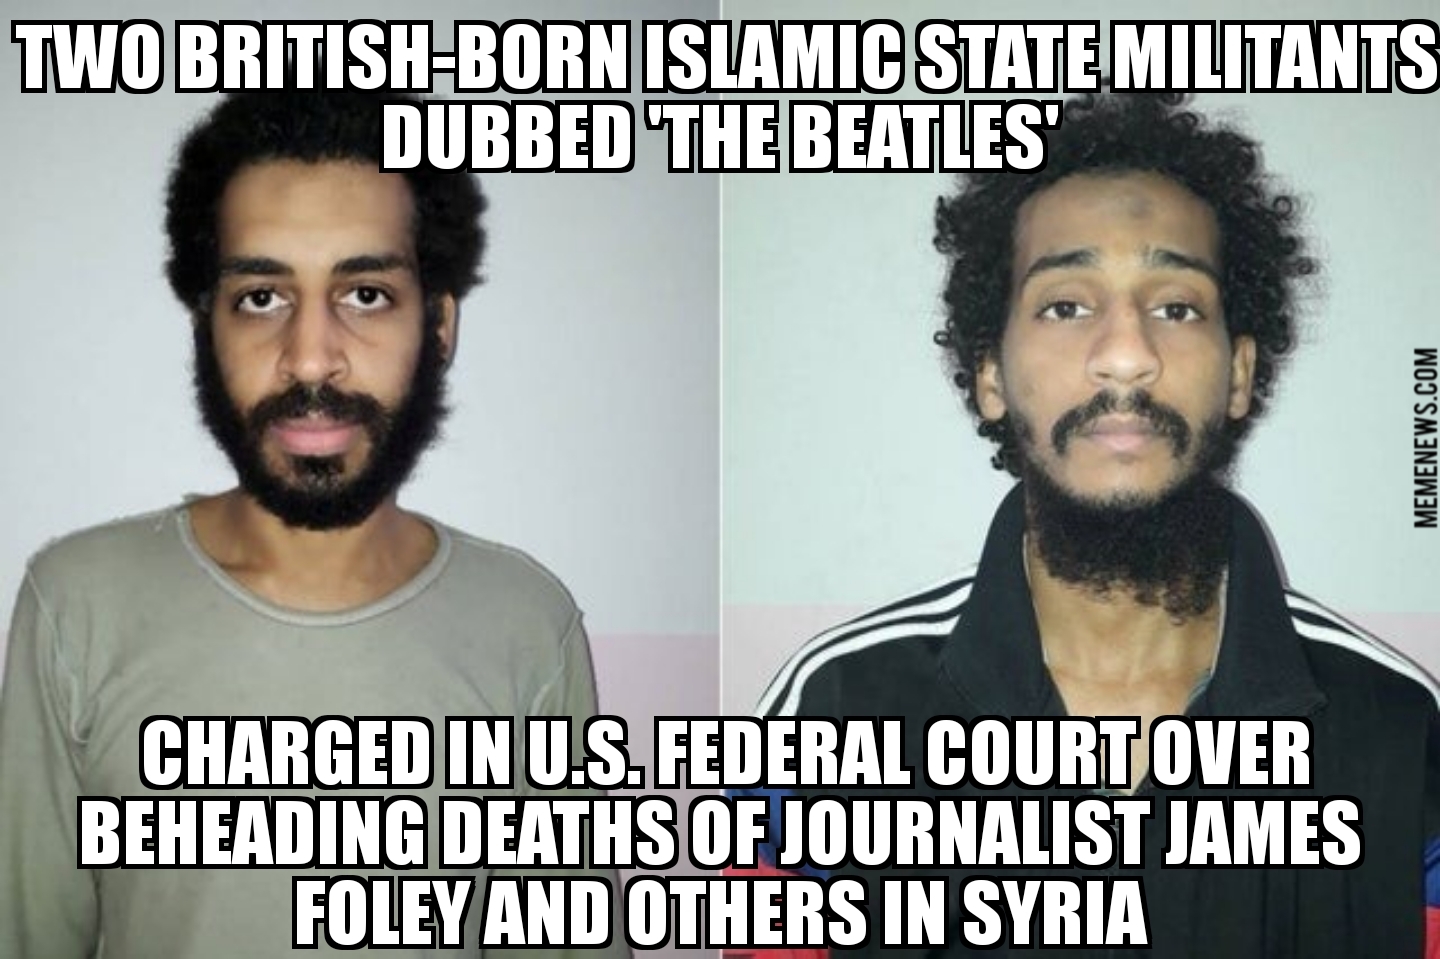 Islamic State ‘Beatles’ charged in U.S.